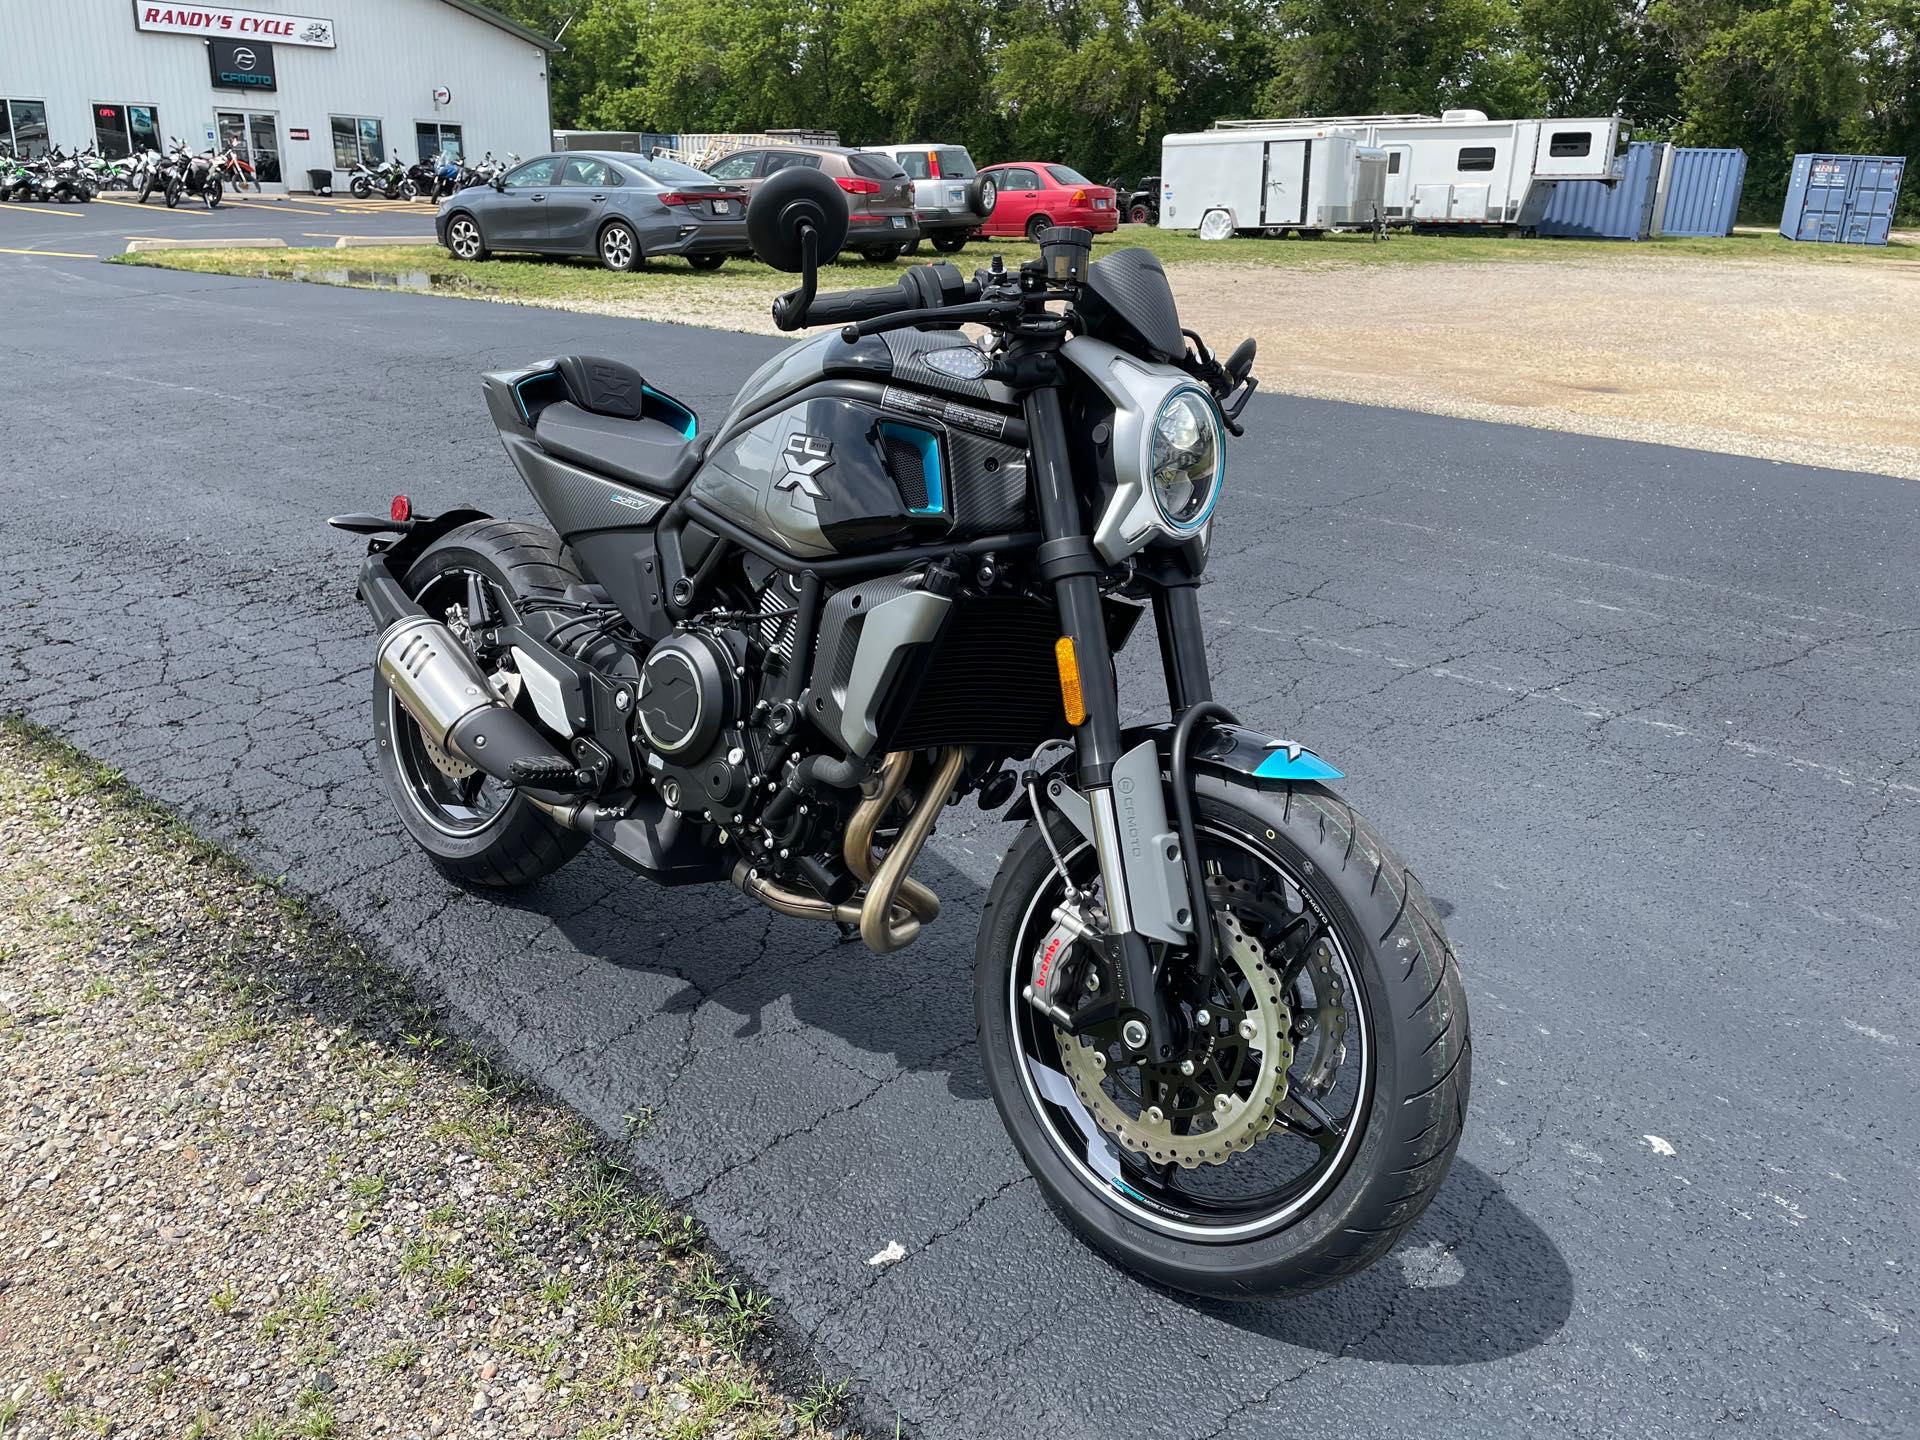 2022 CFMOTO 700CL-X SPORT - VELOCITY GRAY at Randy's Cycle